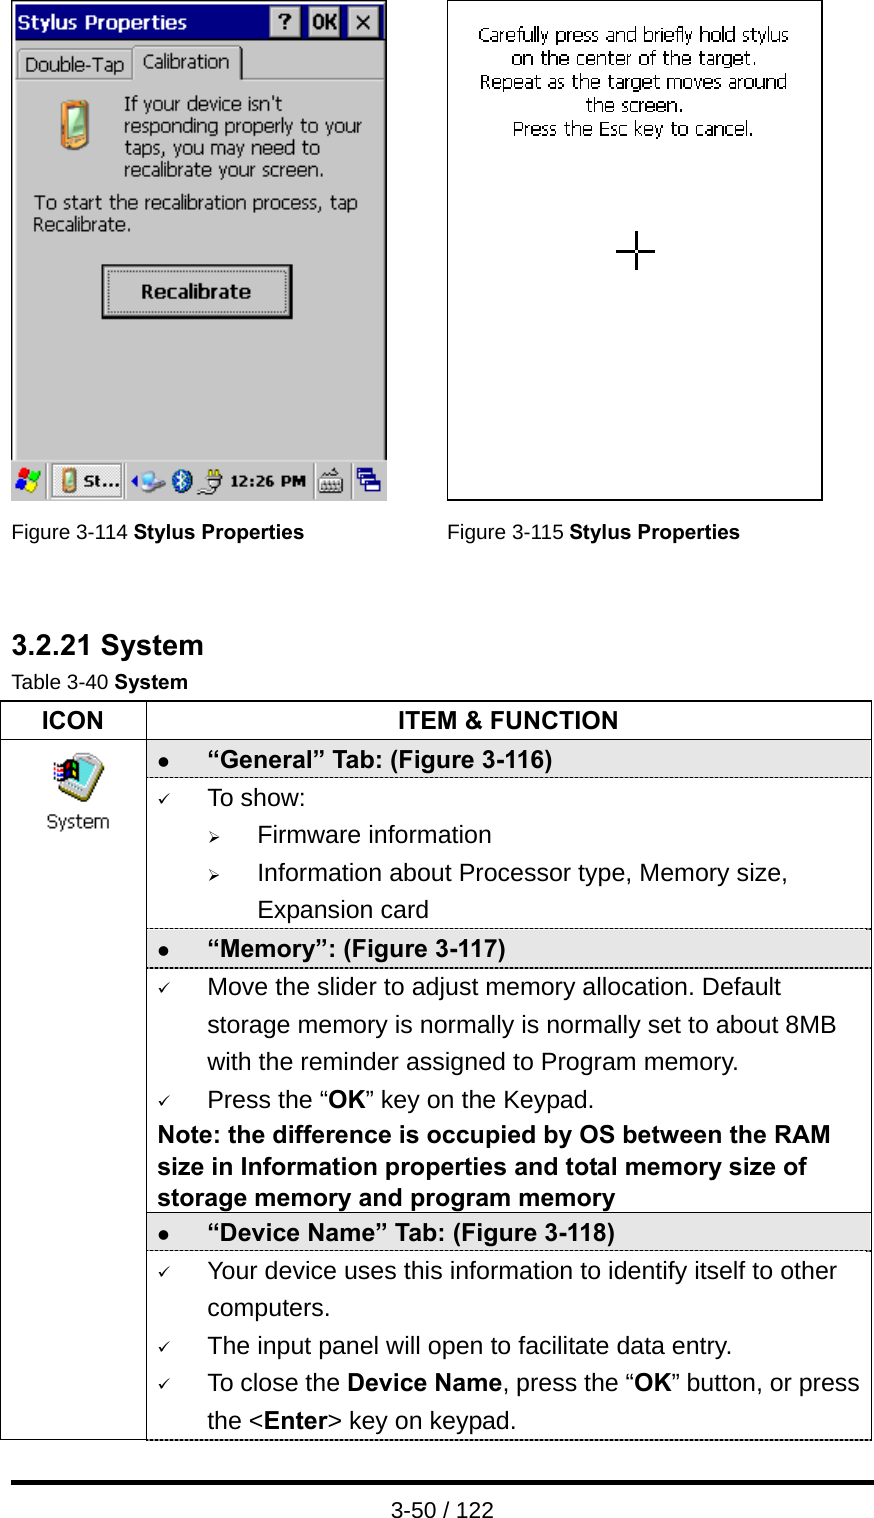  3-50 / 122    Figure 3-114 Stylus Properties Figure 3-115 Stylus Properties   3.2.21 System Table 3-40 System ICON  ITEM &amp; FUNCTION z “General” Tab: (Figure 3-116) 9 To show: ¾ Firmware information   ¾ Information about Processor type, Memory size, Expansion card z “Memory”: (Figure 3-117) 9 Move the slider to adjust memory allocation. Default storage memory is normally is normally set to about 8MB with the reminder assigned to Program memory. 9 Press the “OK” key on the Keypad.   Note: the difference is occupied by OS between the RAM size in Information properties and total memory size of storage memory and program memory   z “Device Name” Tab: (Figure 3-118)                 9 Your device uses this information to identify itself to other computers. 9 The input panel will open to facilitate data entry. 9 To close the Device Name, press the “OK” button, or press the &lt;Enter&gt; key on keypad. 